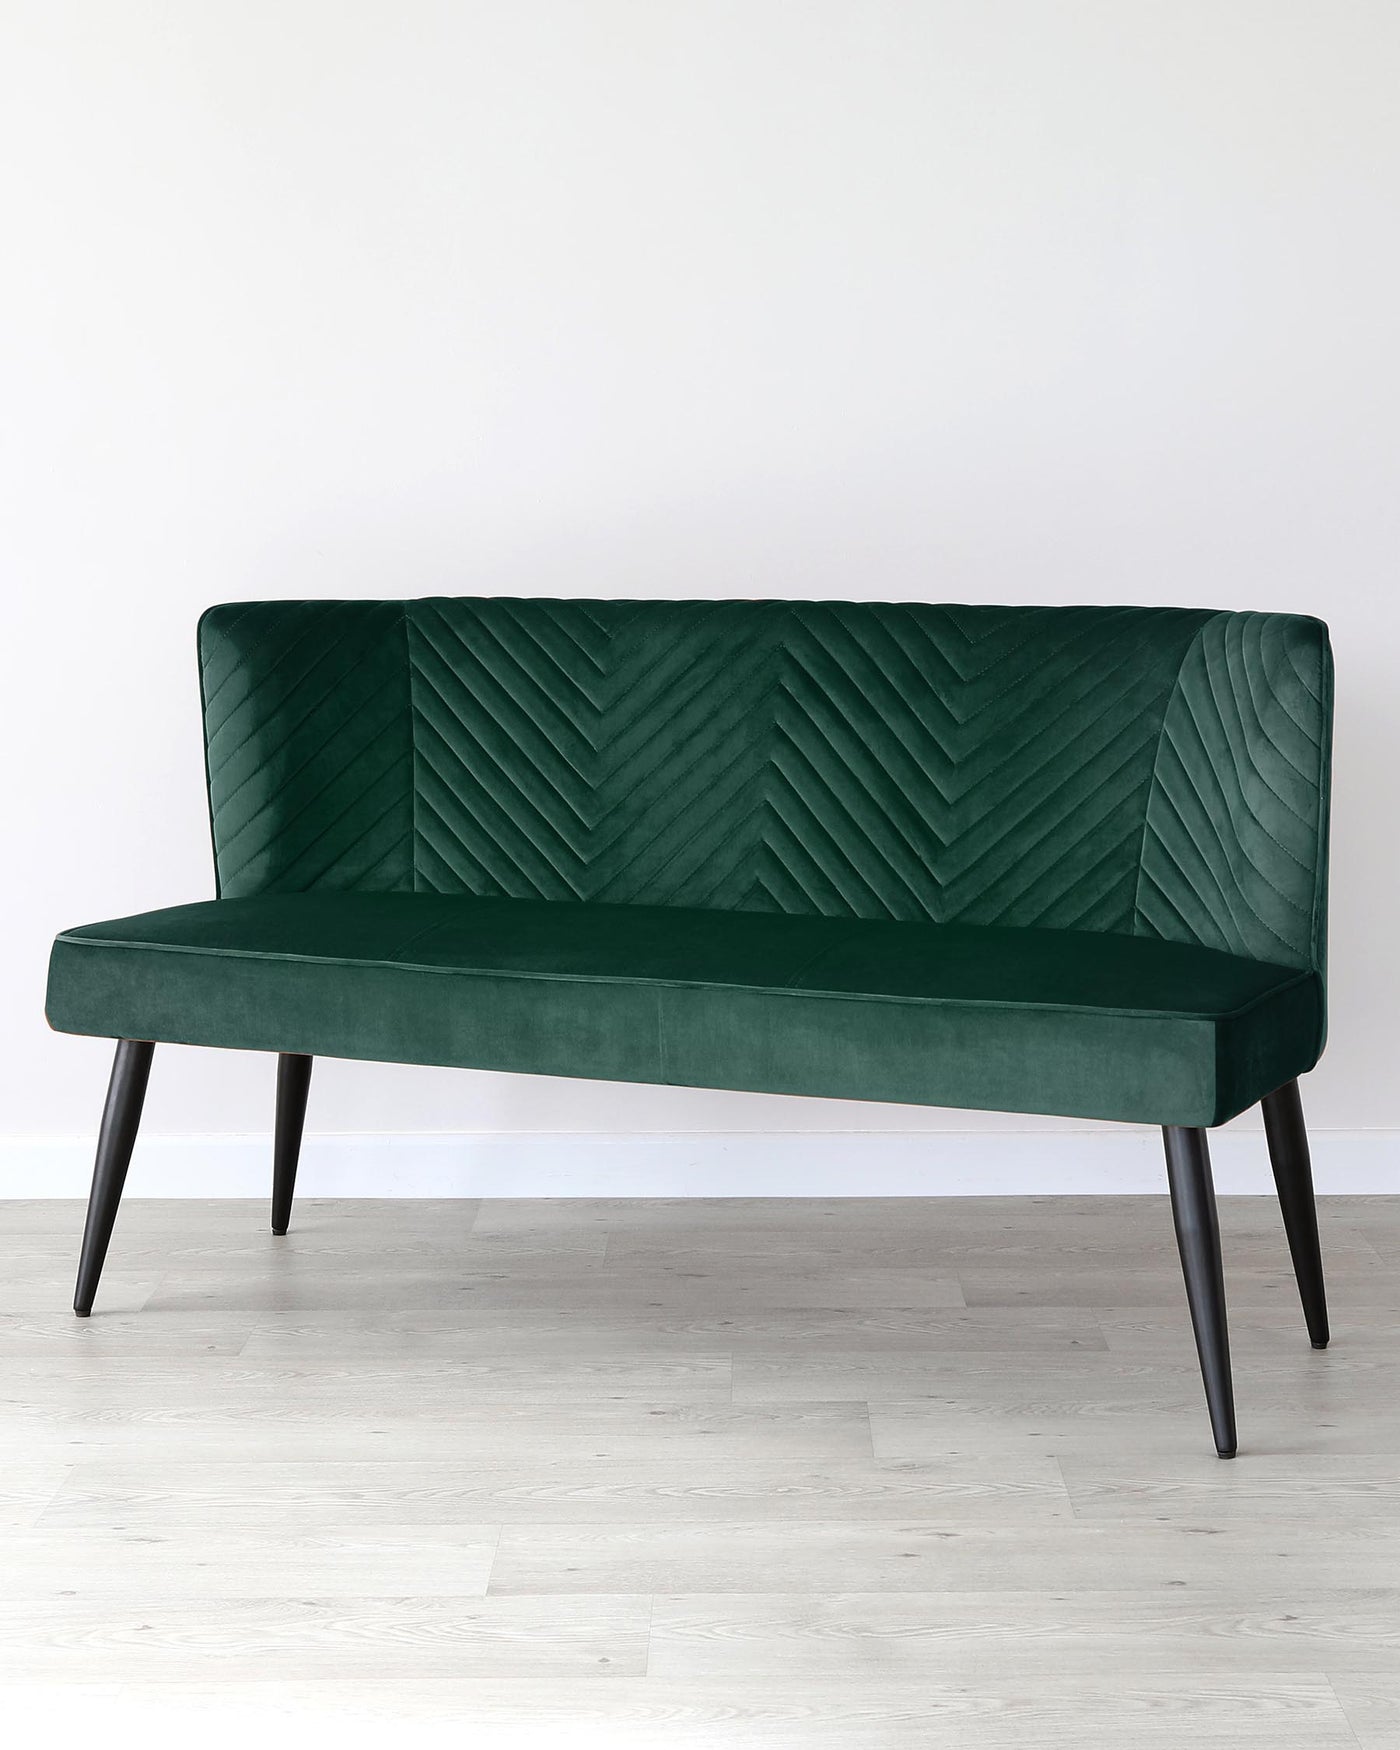 Elegant emerald green velvet settee with a high back, chevron-patterned tufting, and angled black wooden legs, presented against a plain white wall and light wooden flooring.